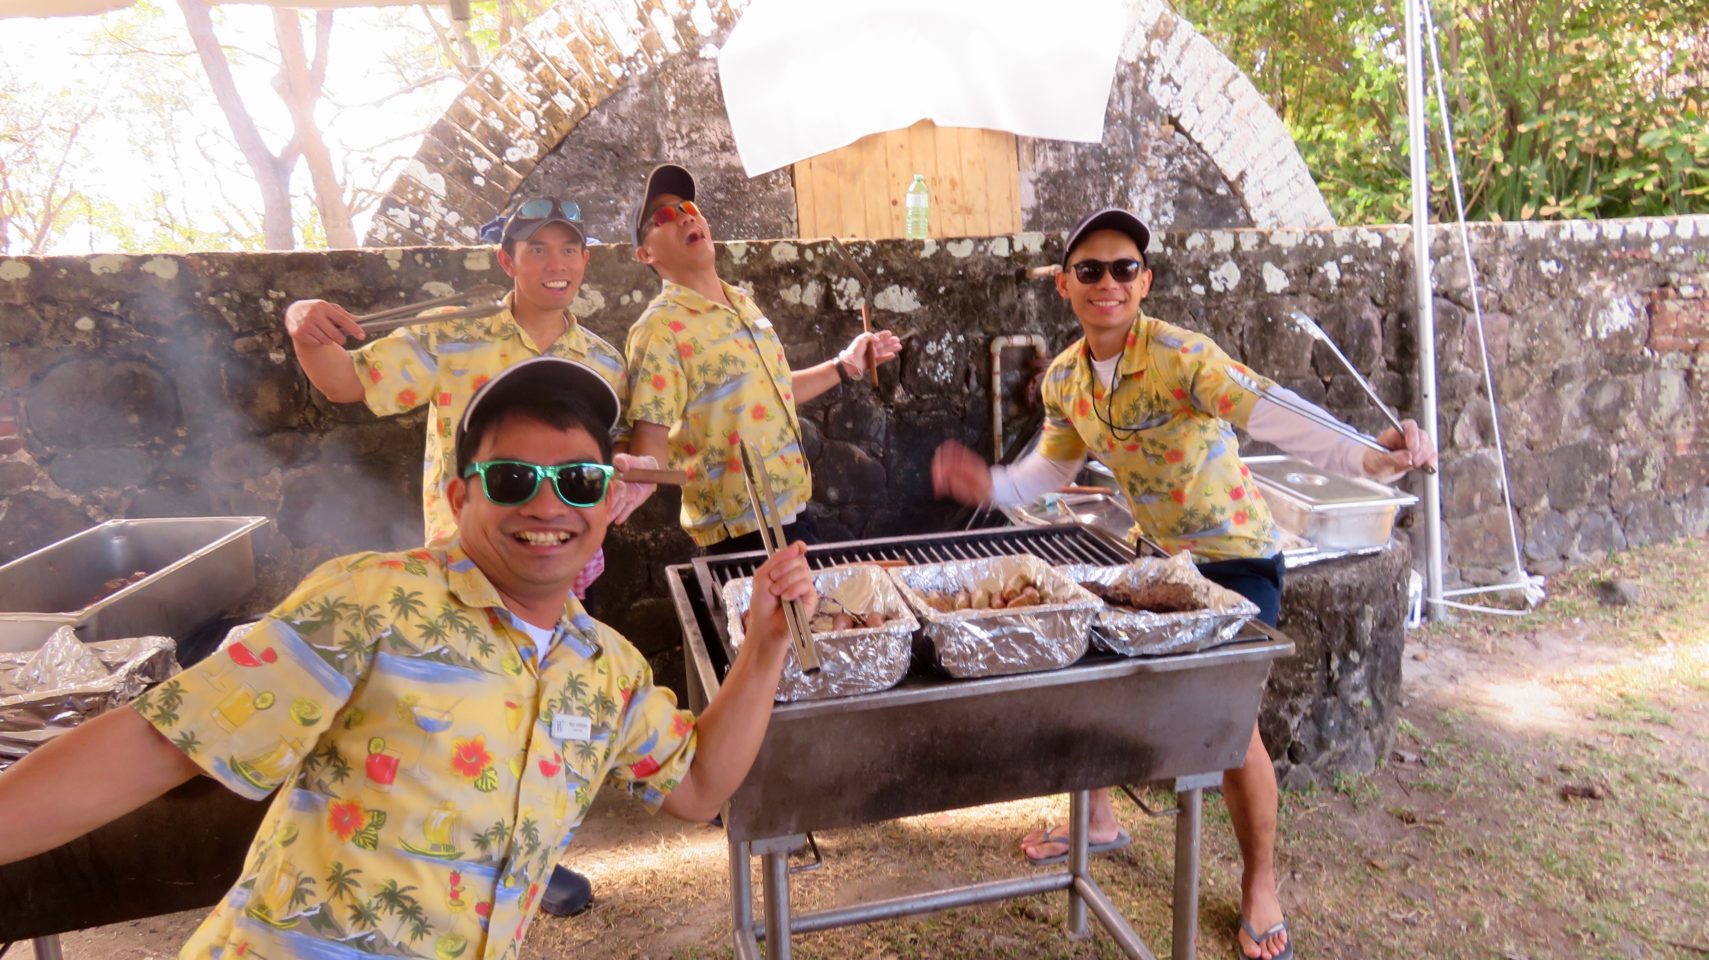 Windstar Cruises ~ my favorite restaurant servers posing with panche at our Island Barbeque, a Windstar tradition